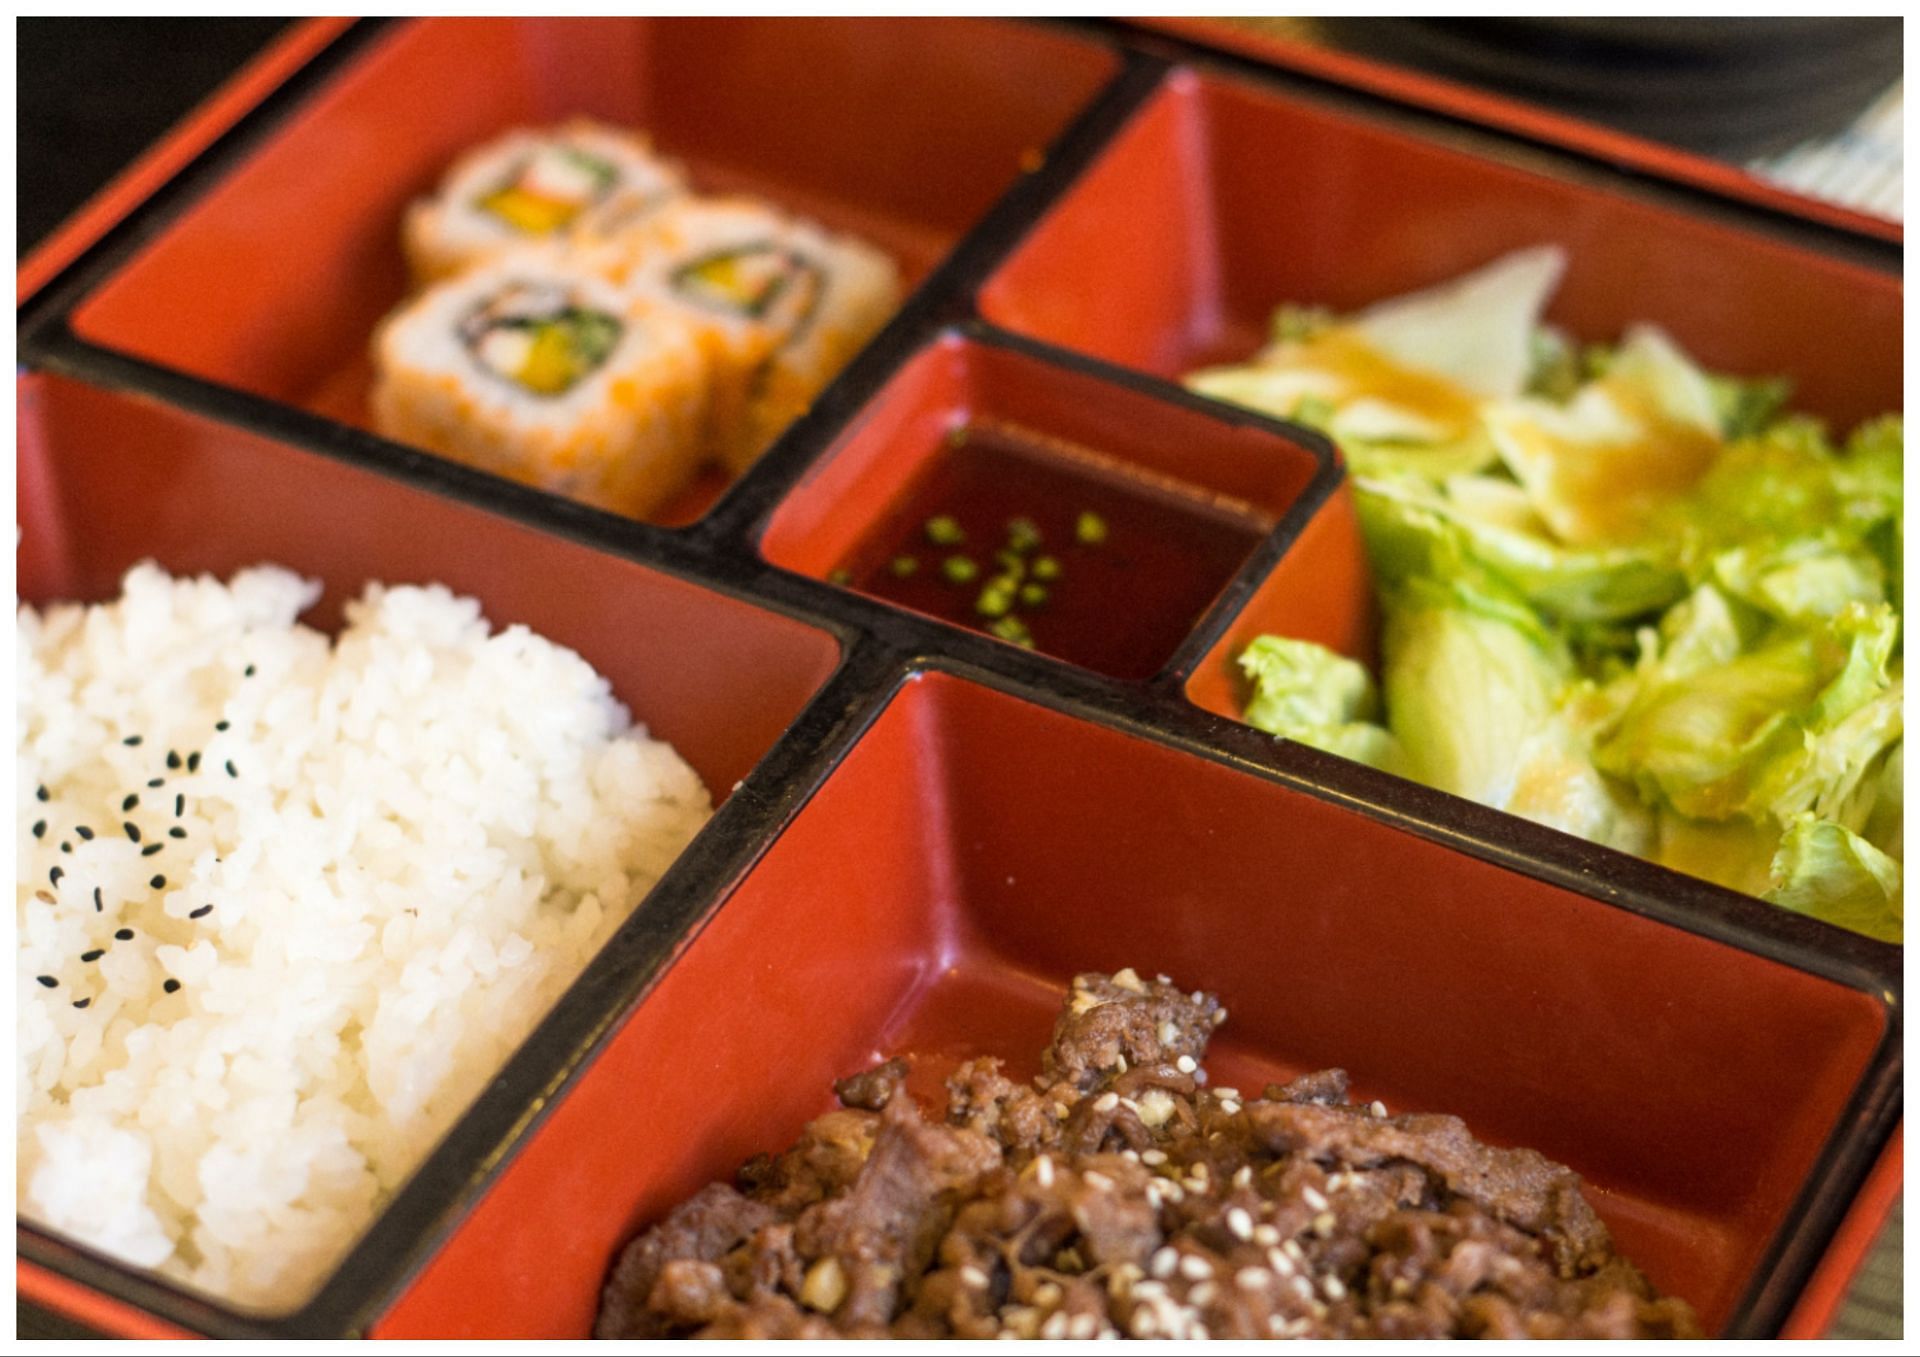 Eco Ben, Japan's Answer to Environmentally Unfriendly Disposable Bento Boxes  - JapanKyo - Interesting news on Japan, podcasts about Japan & more